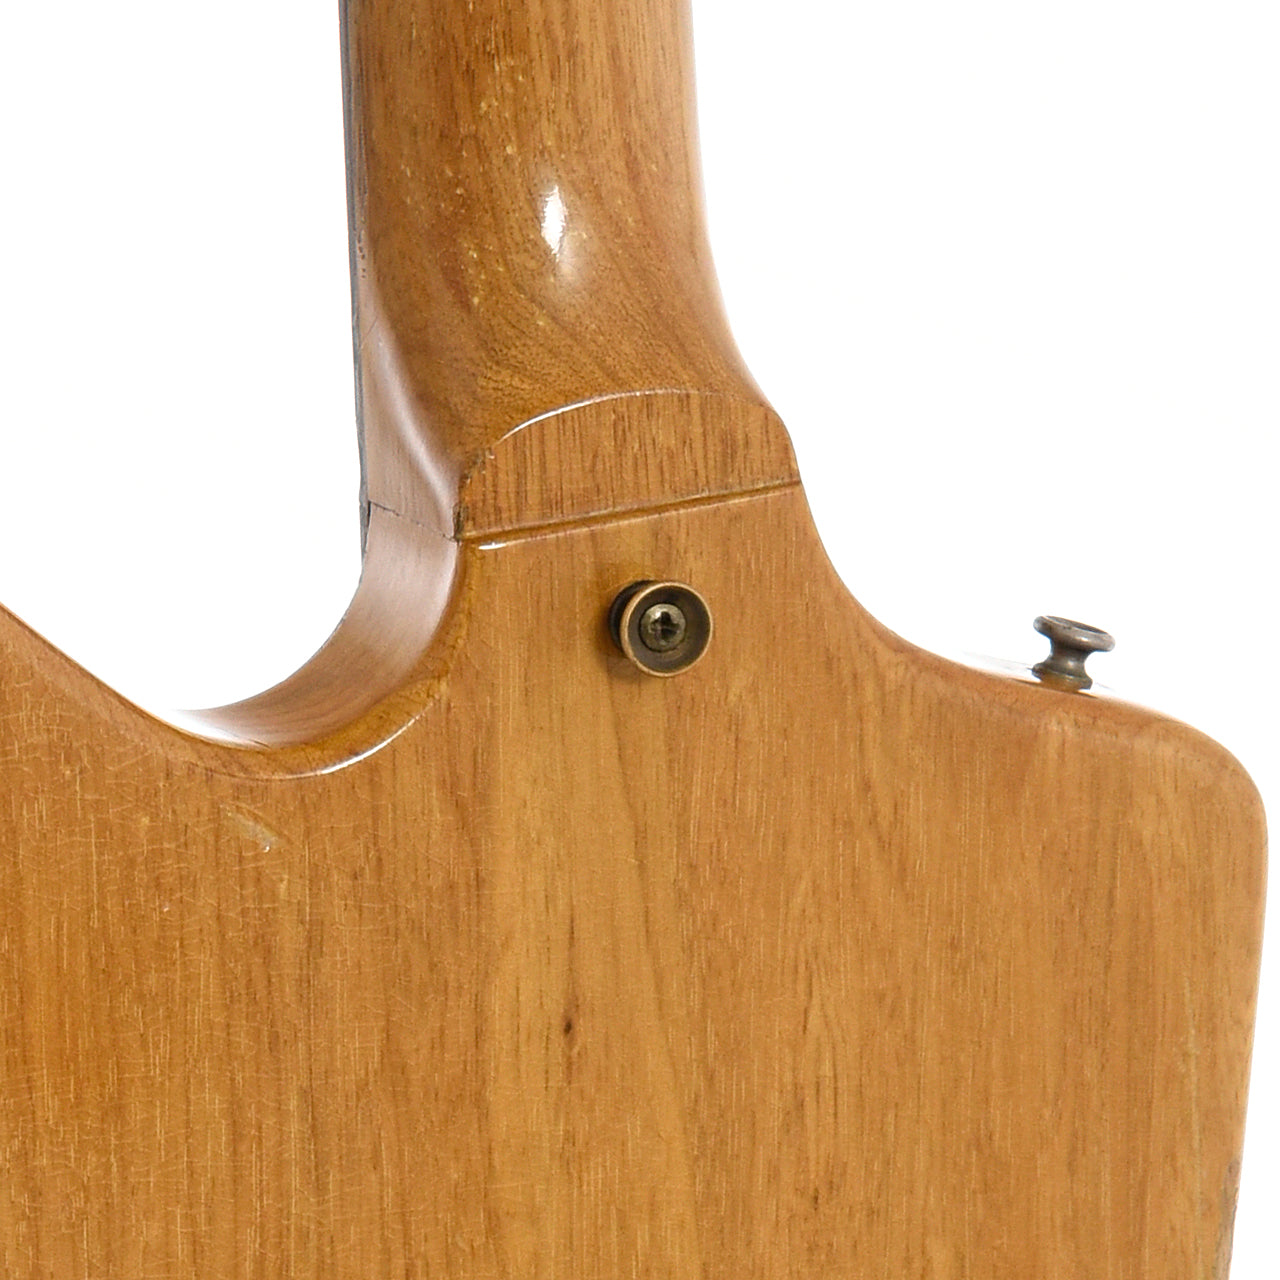 Neck joint of Gibson Explorer Electric Guitar (1963)